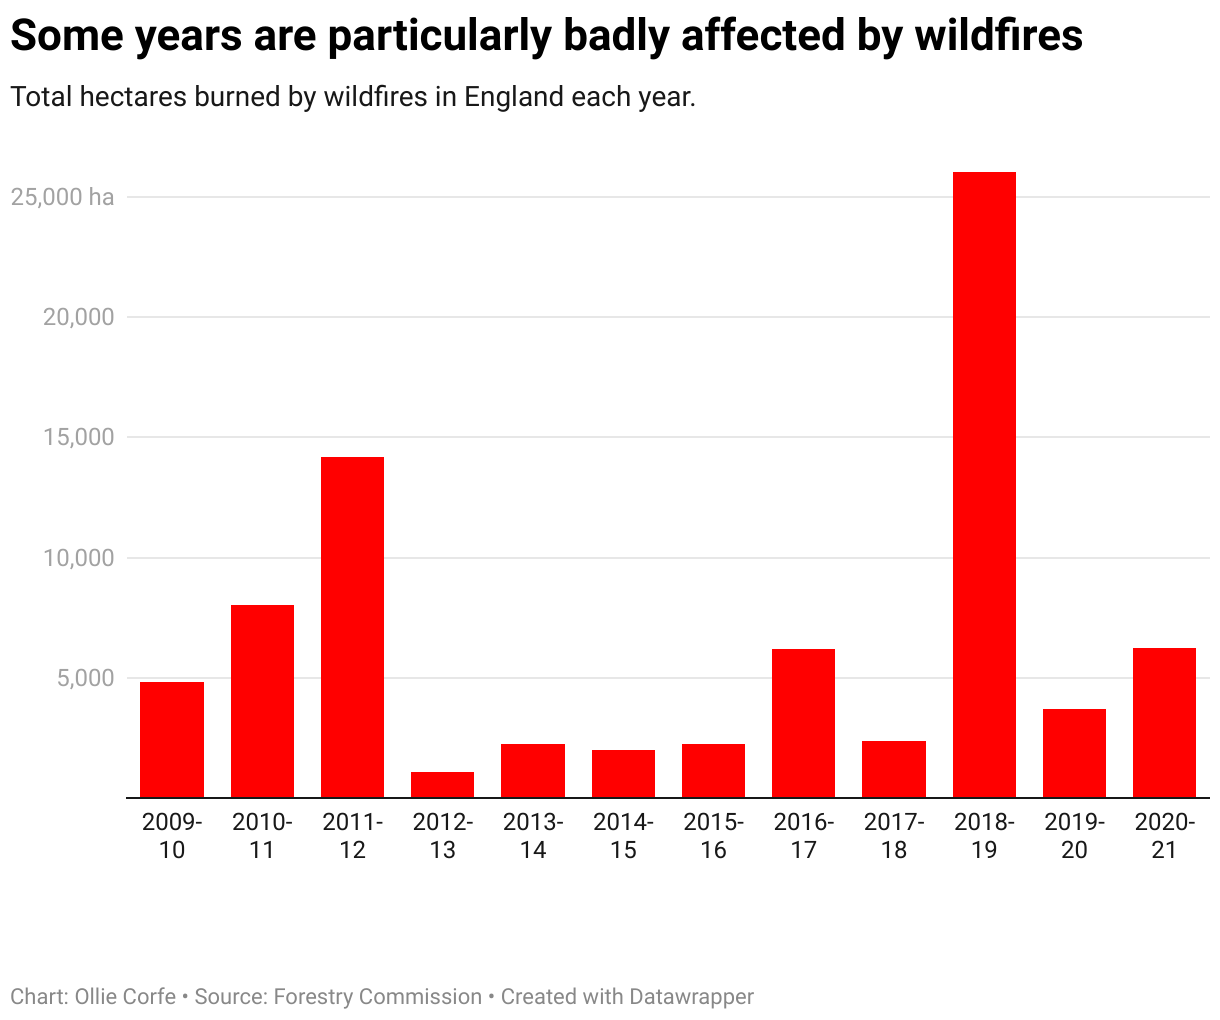 Hectares burned by wildfires per year.